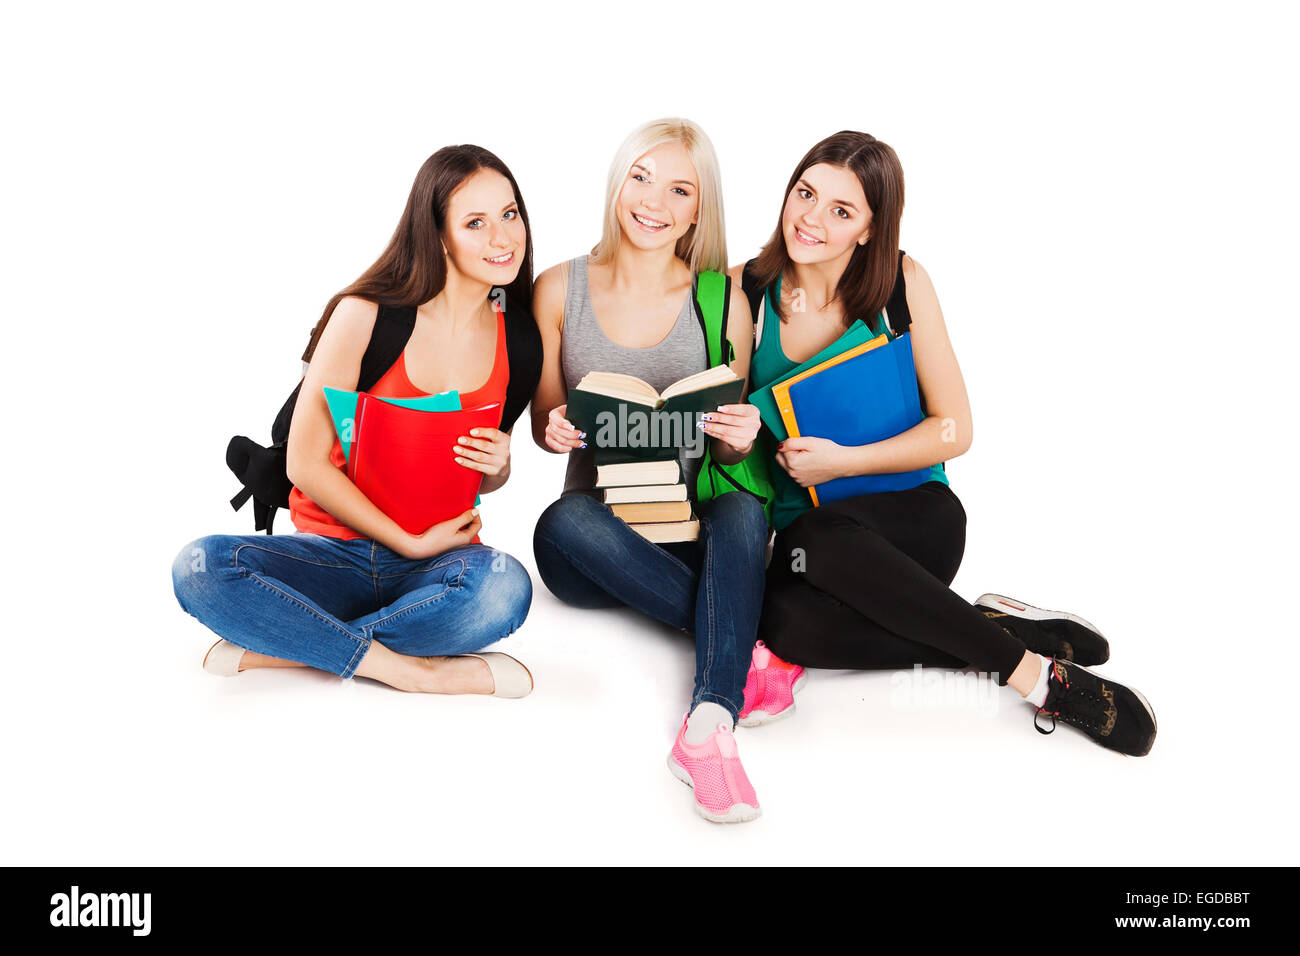 group of the college students on a white background Stock Photo